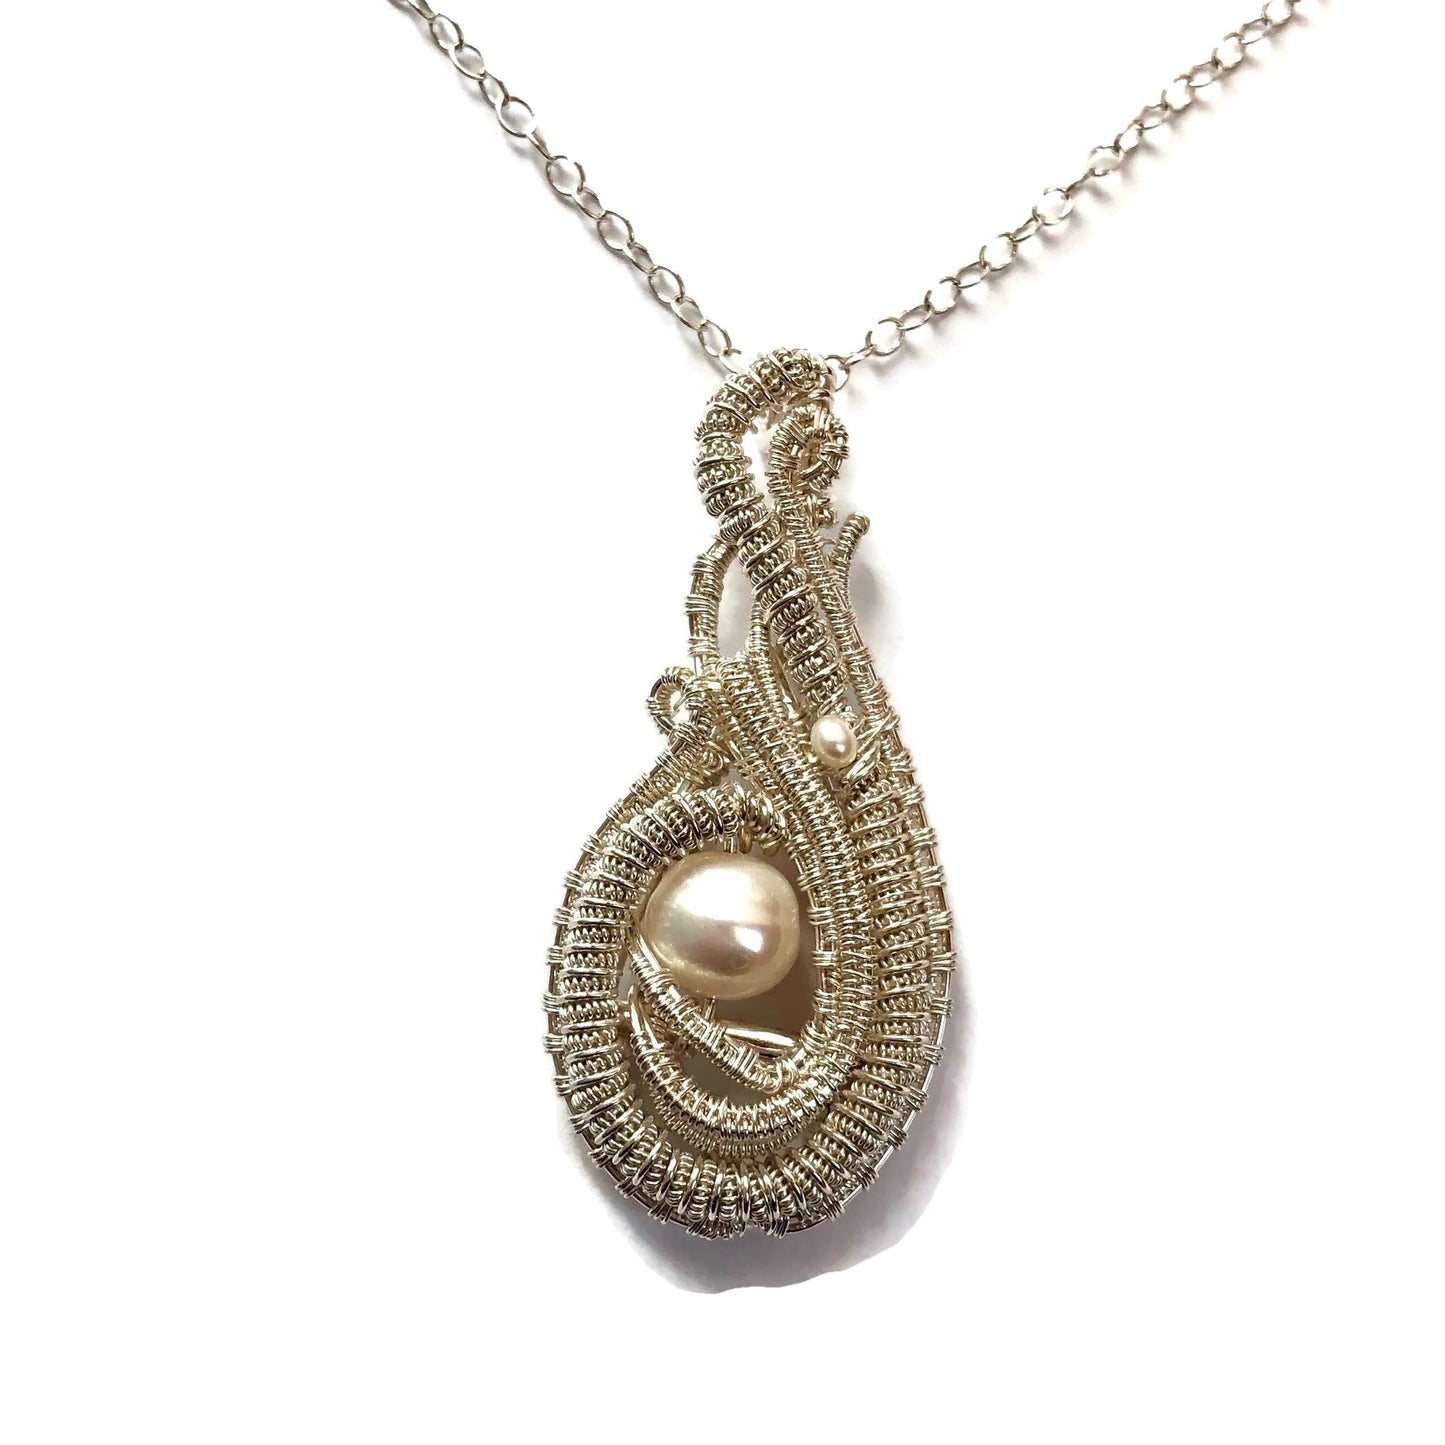 Musical Sea Pearl Woven Silver Necklace